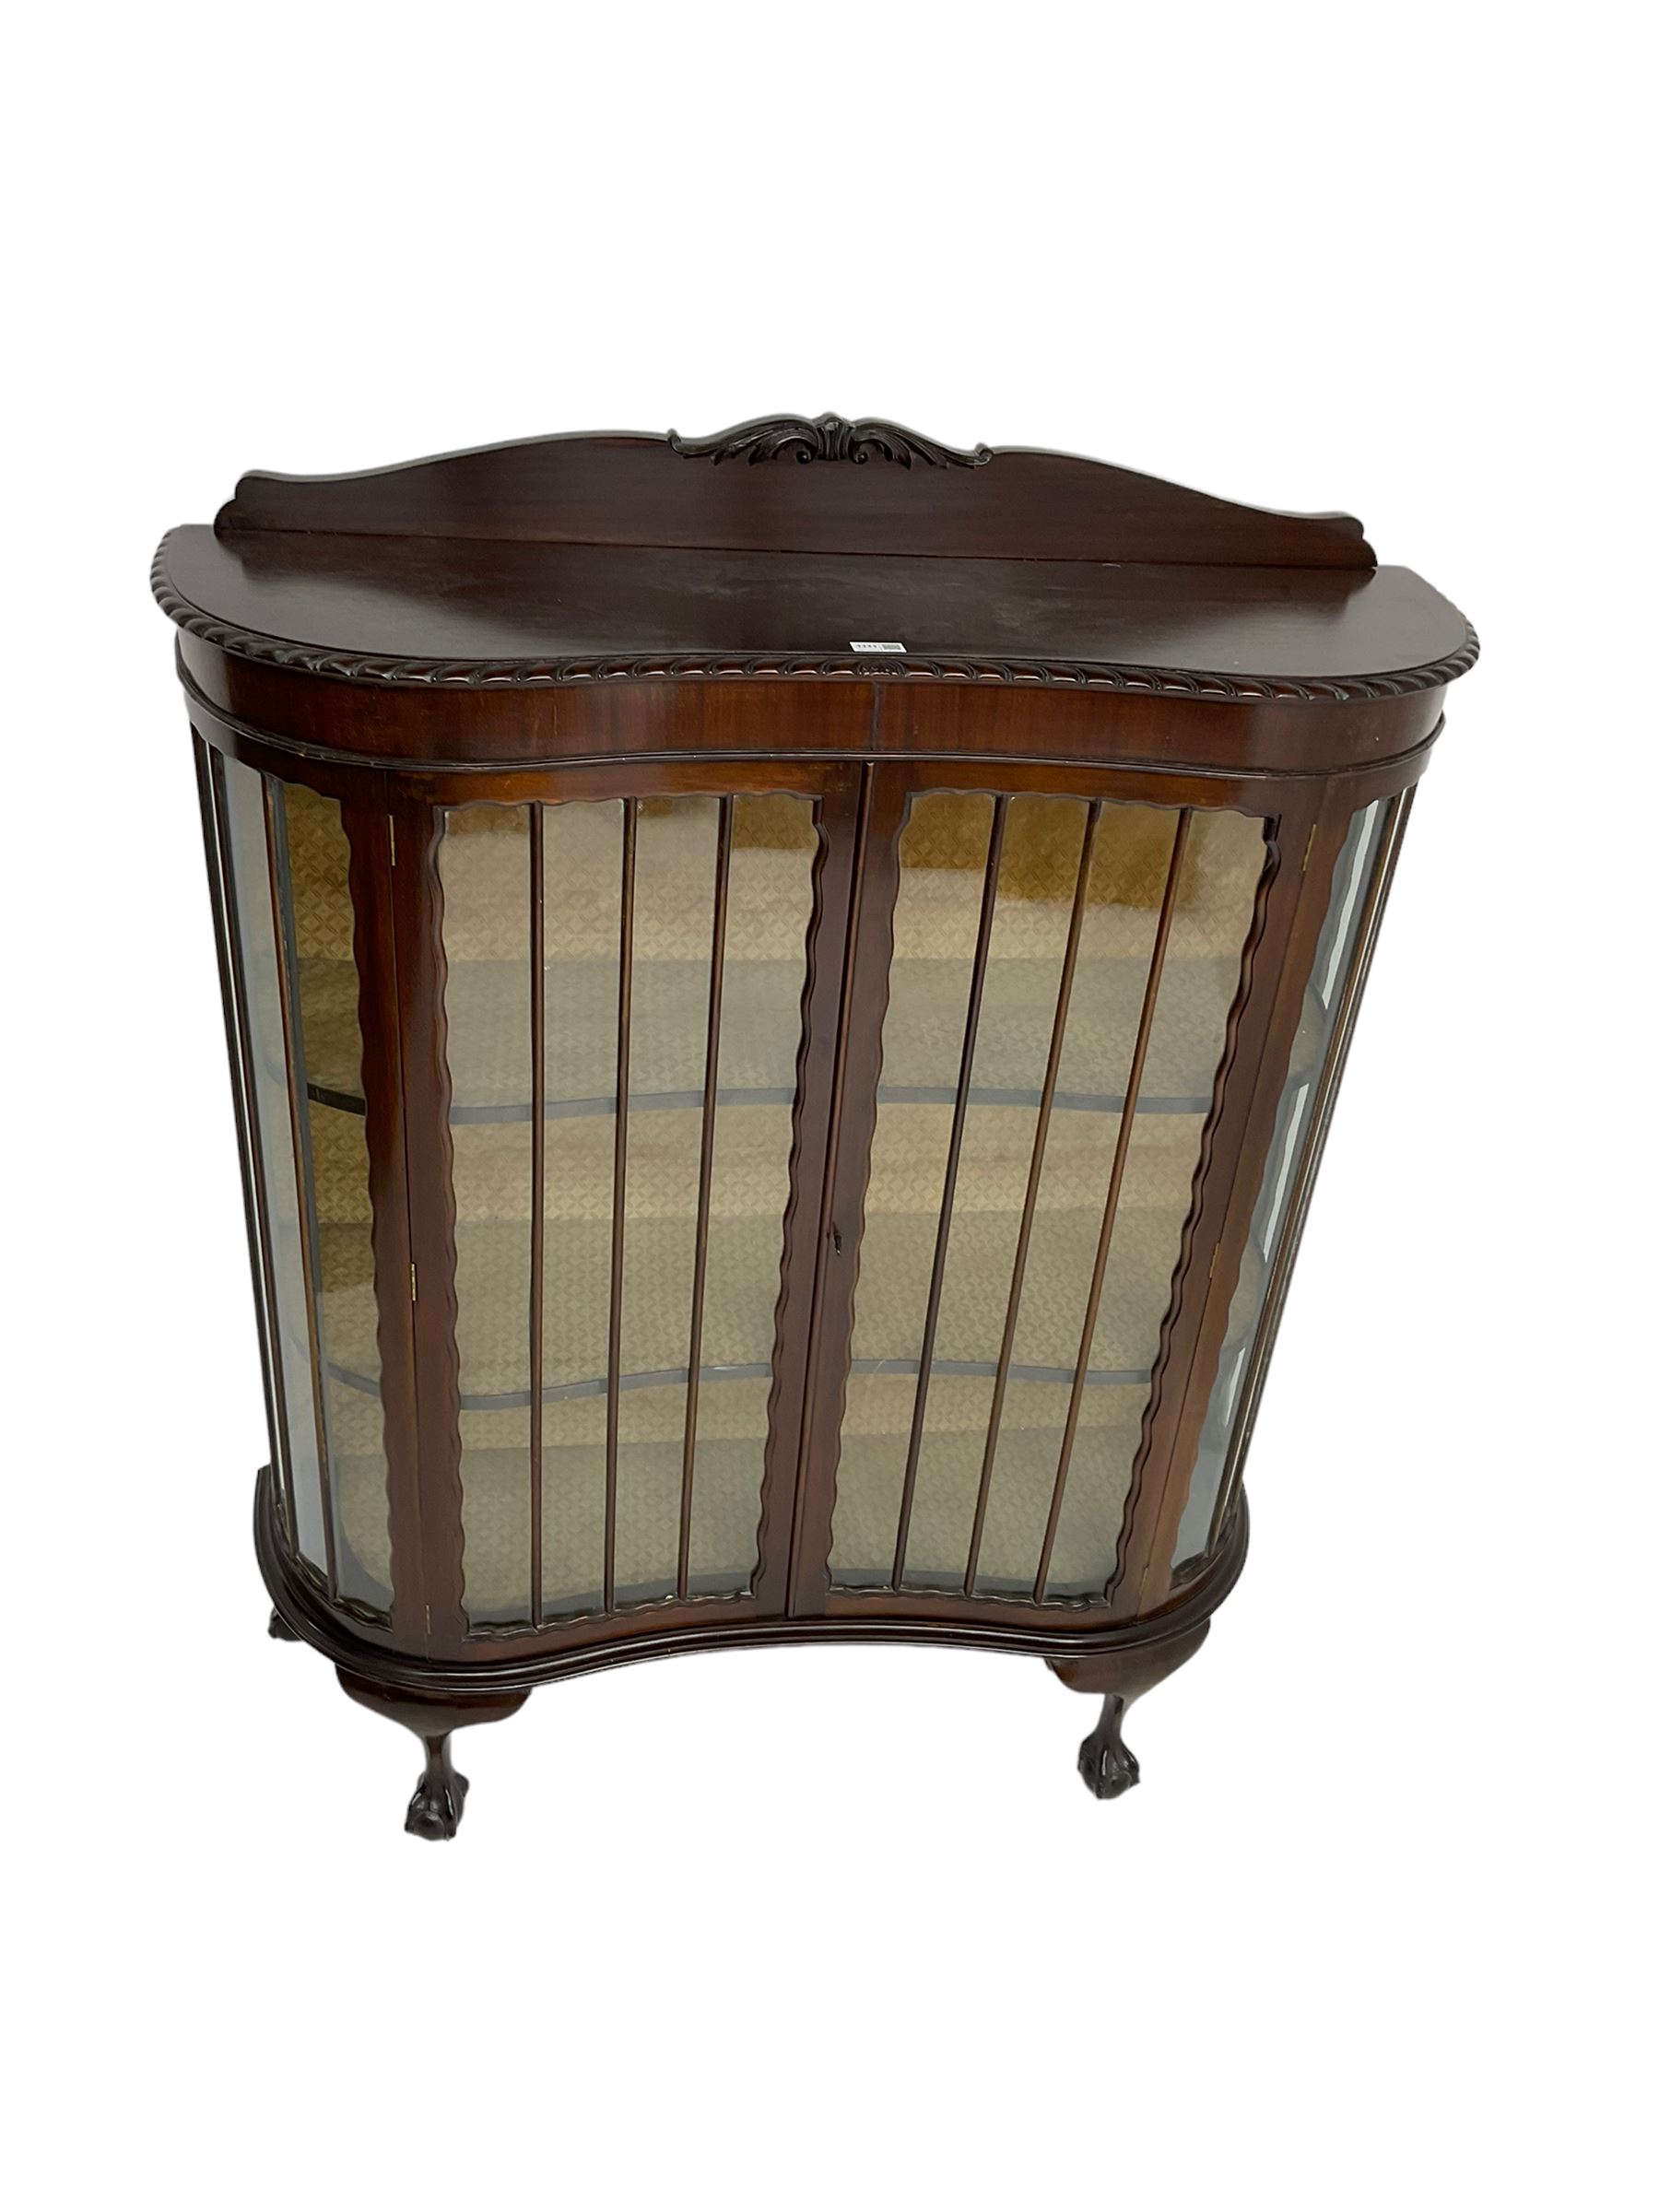 Early 20th century mahogany serpentine display cabinet - Image 2 of 4